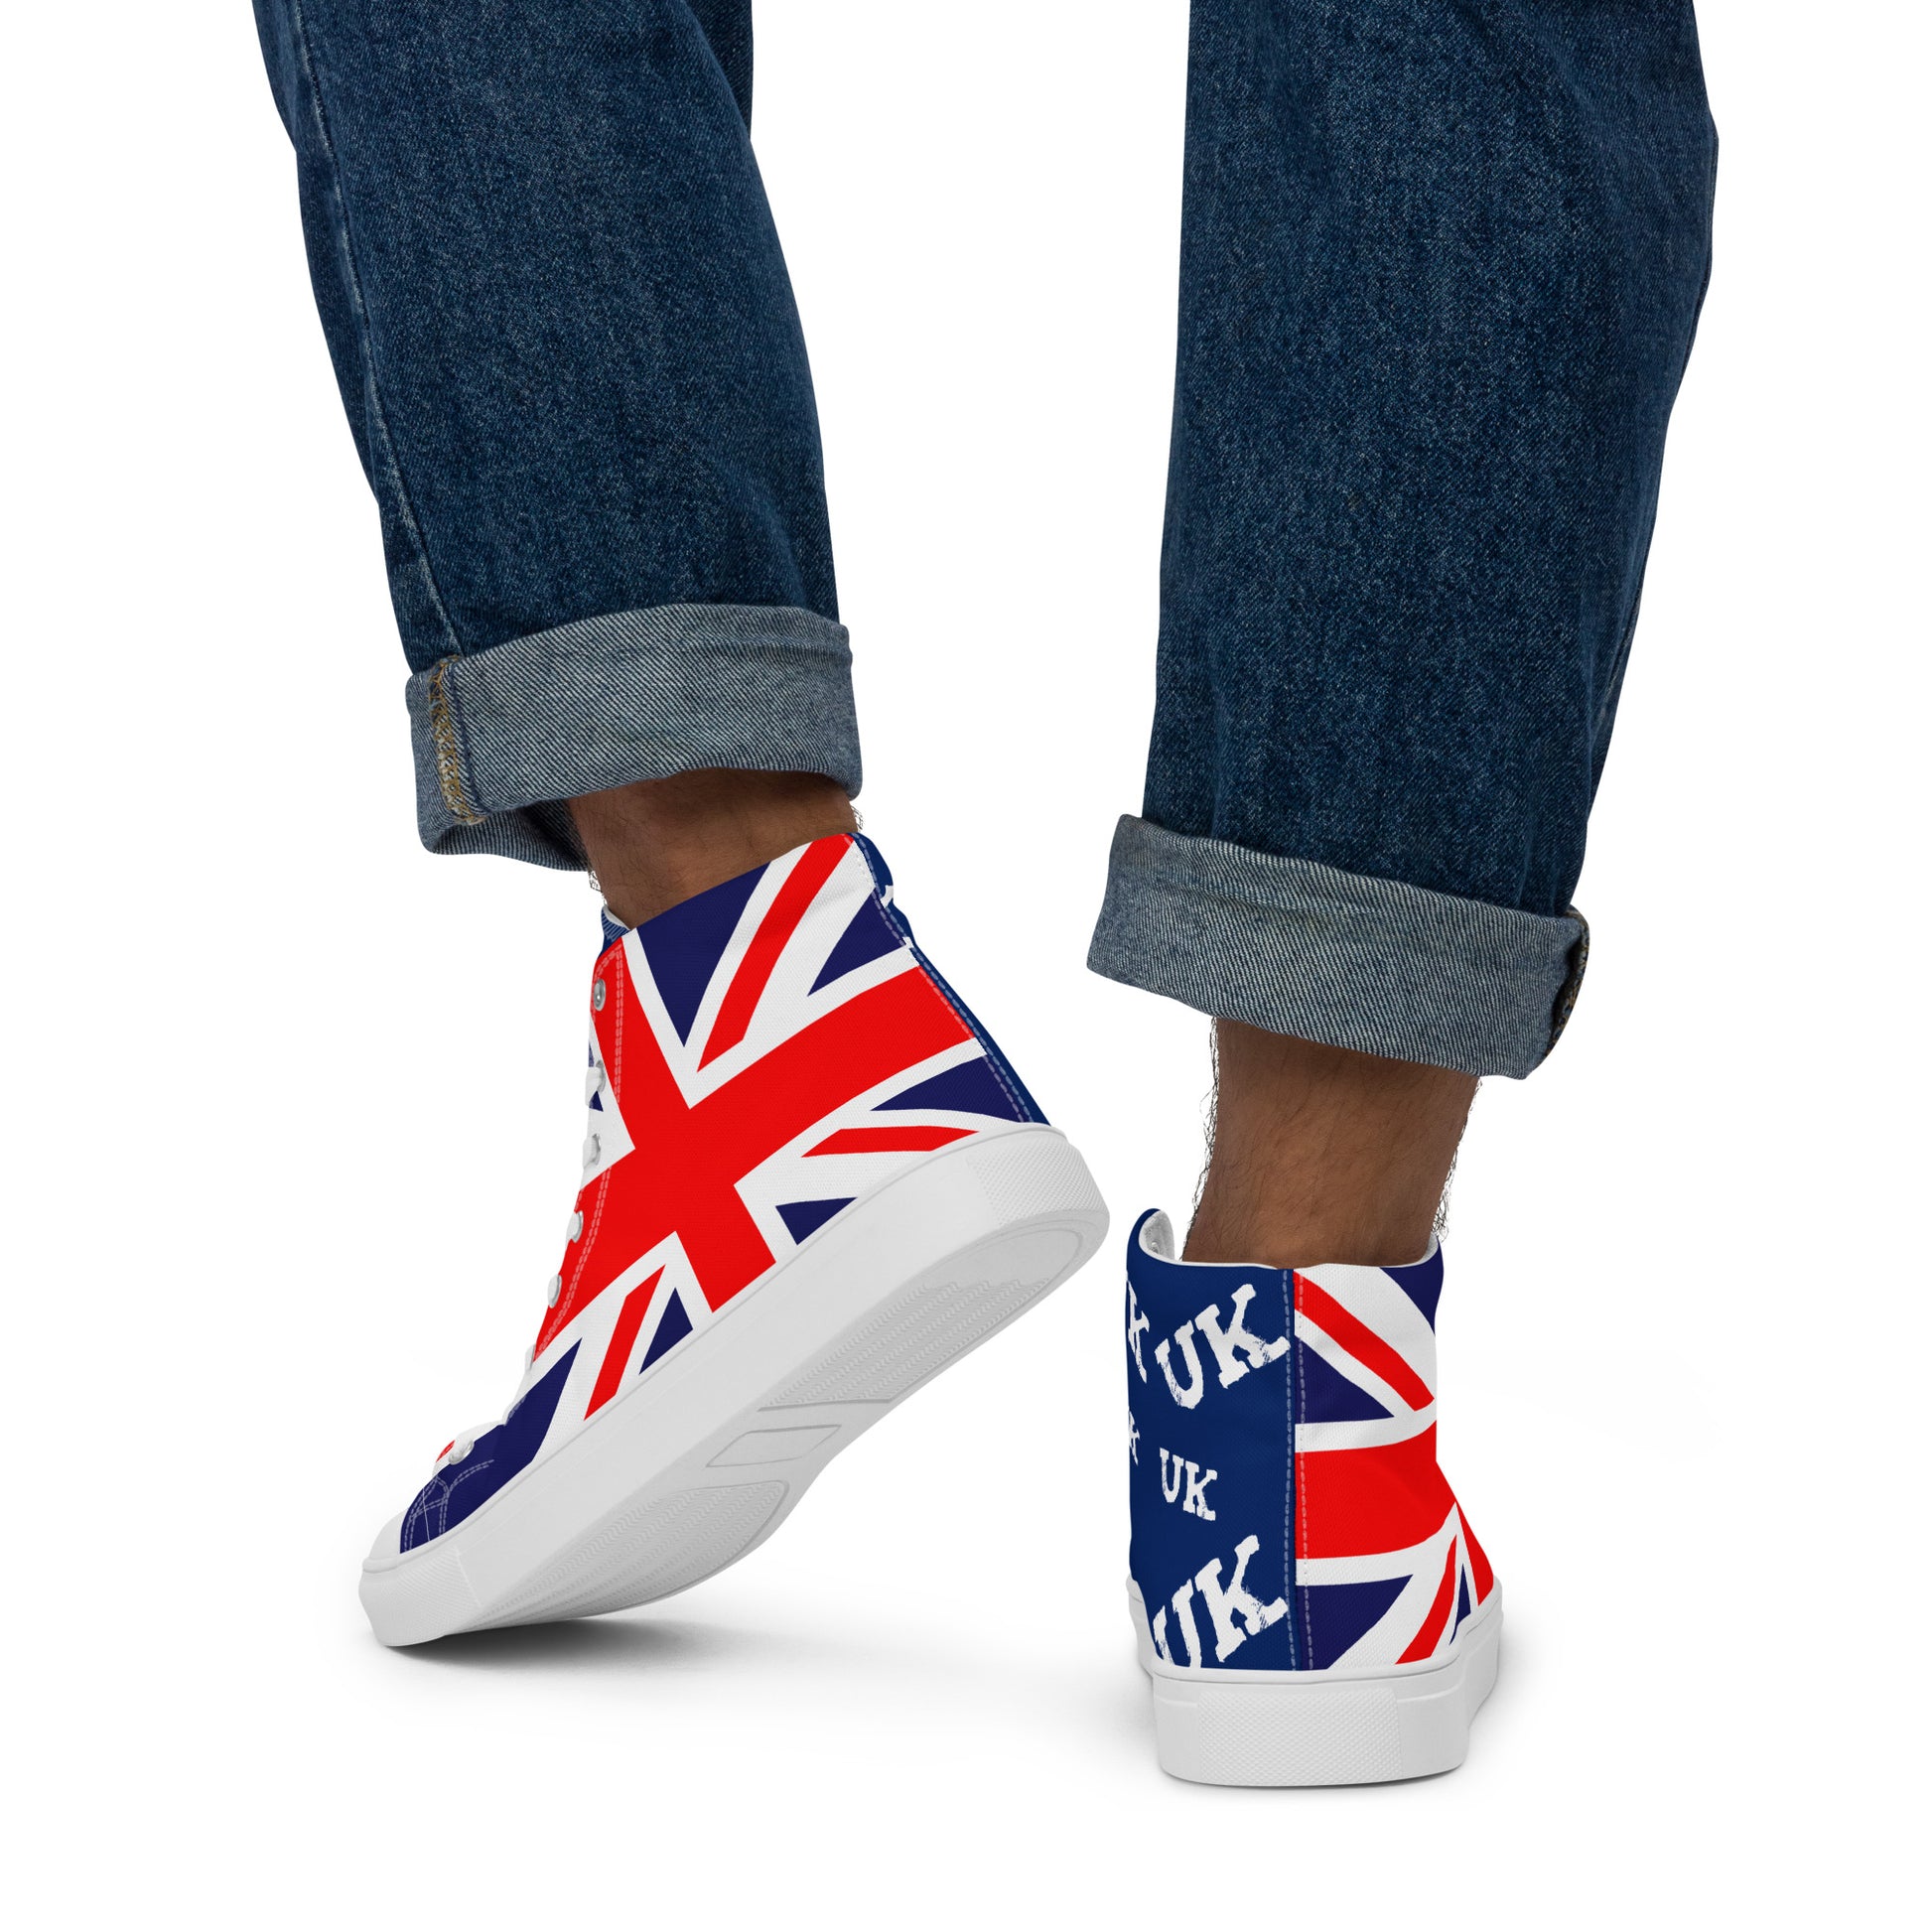 High Top Shoes For Men With UK Print